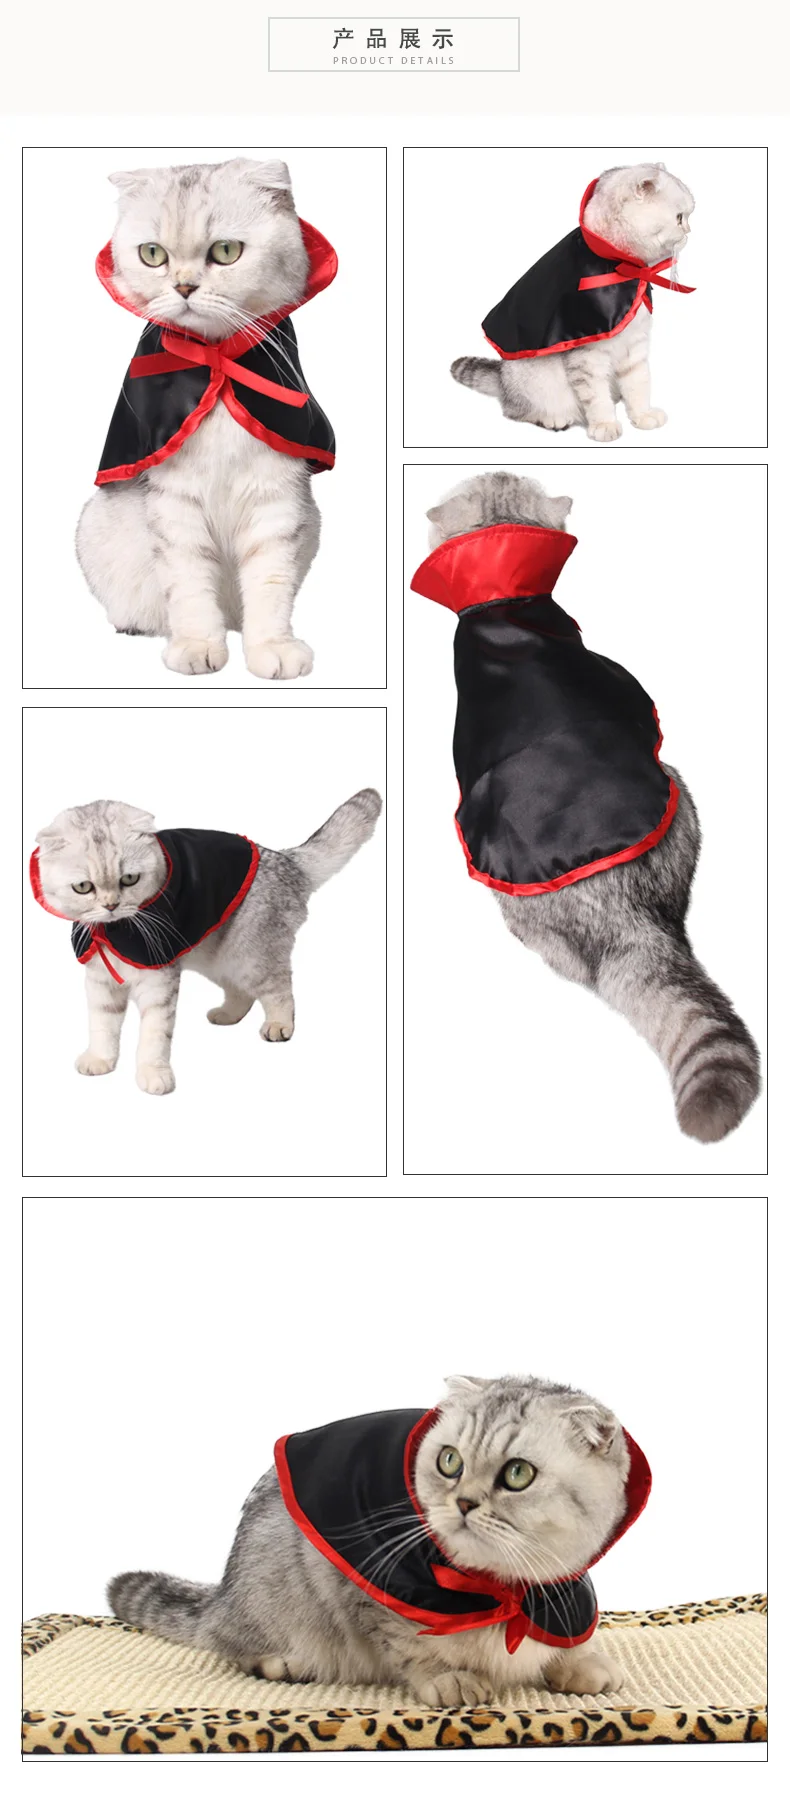 

Creative Cartoon Cat Clothes Novelty Personalized Apparel Outfits Cat Costume Fashion Coat Vetement Chat Pet Supplies YY50CT